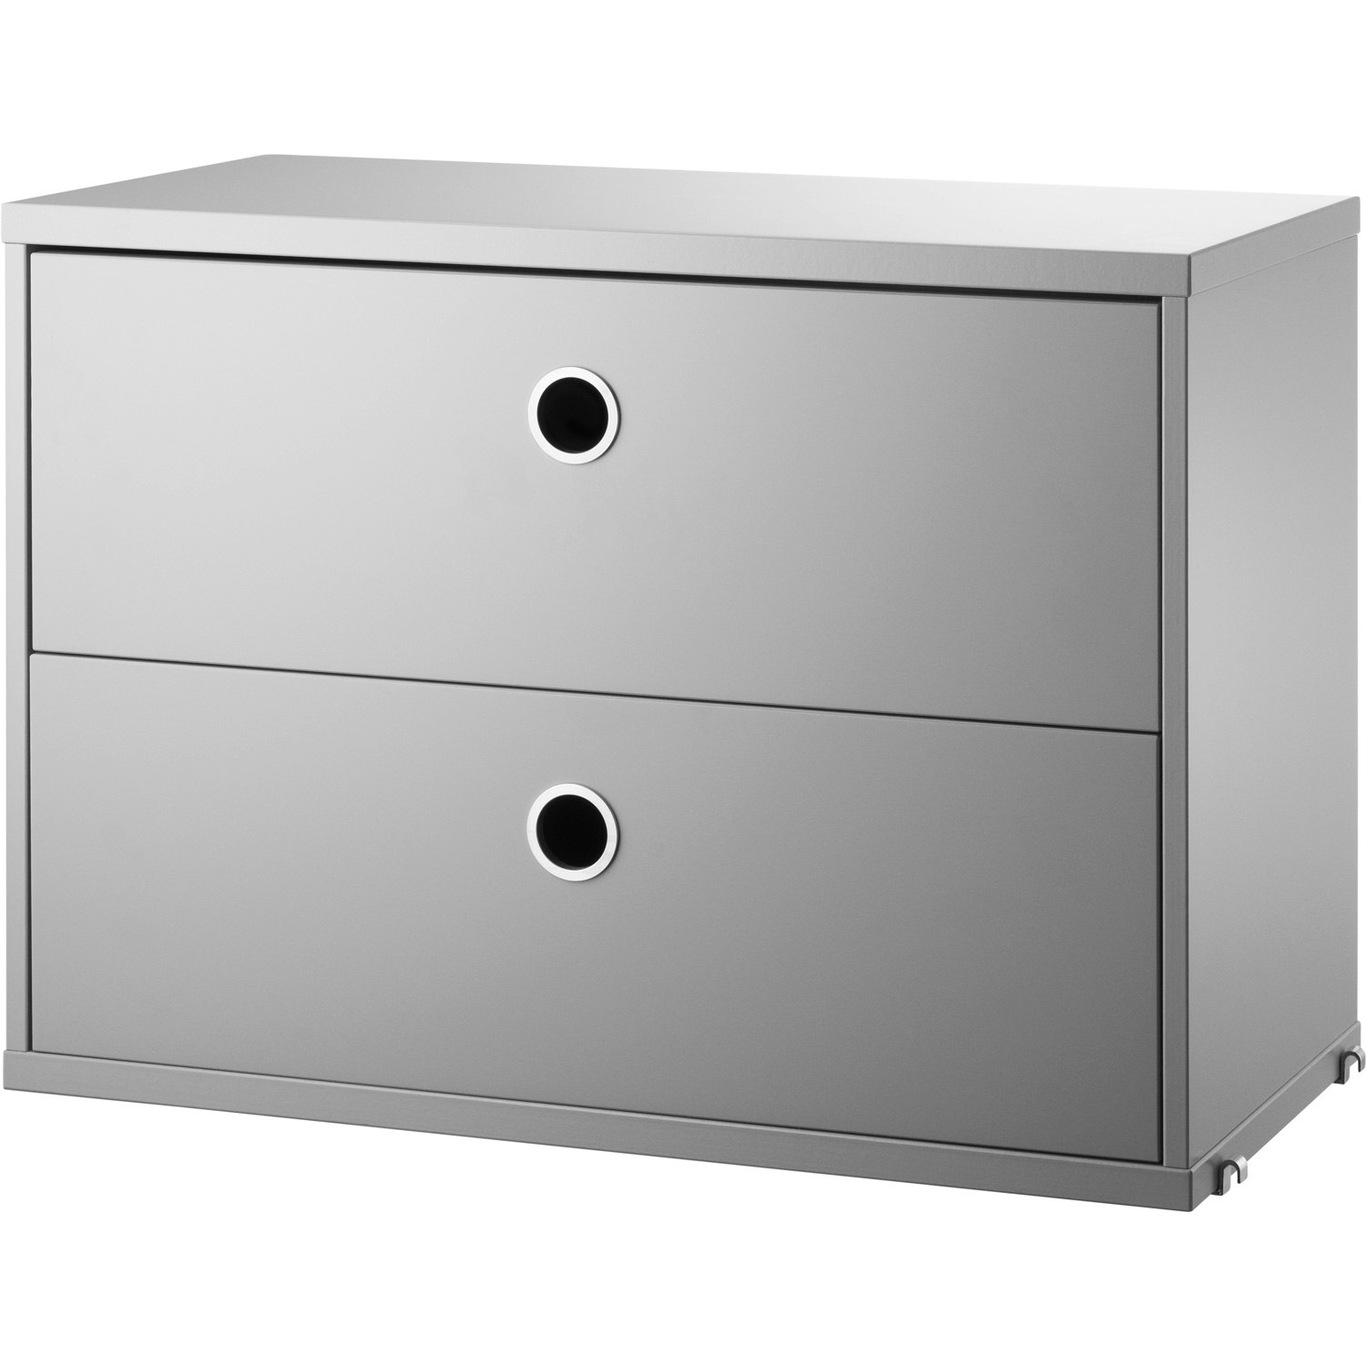 String Chest Of Drawers 58x30 cm, Grey